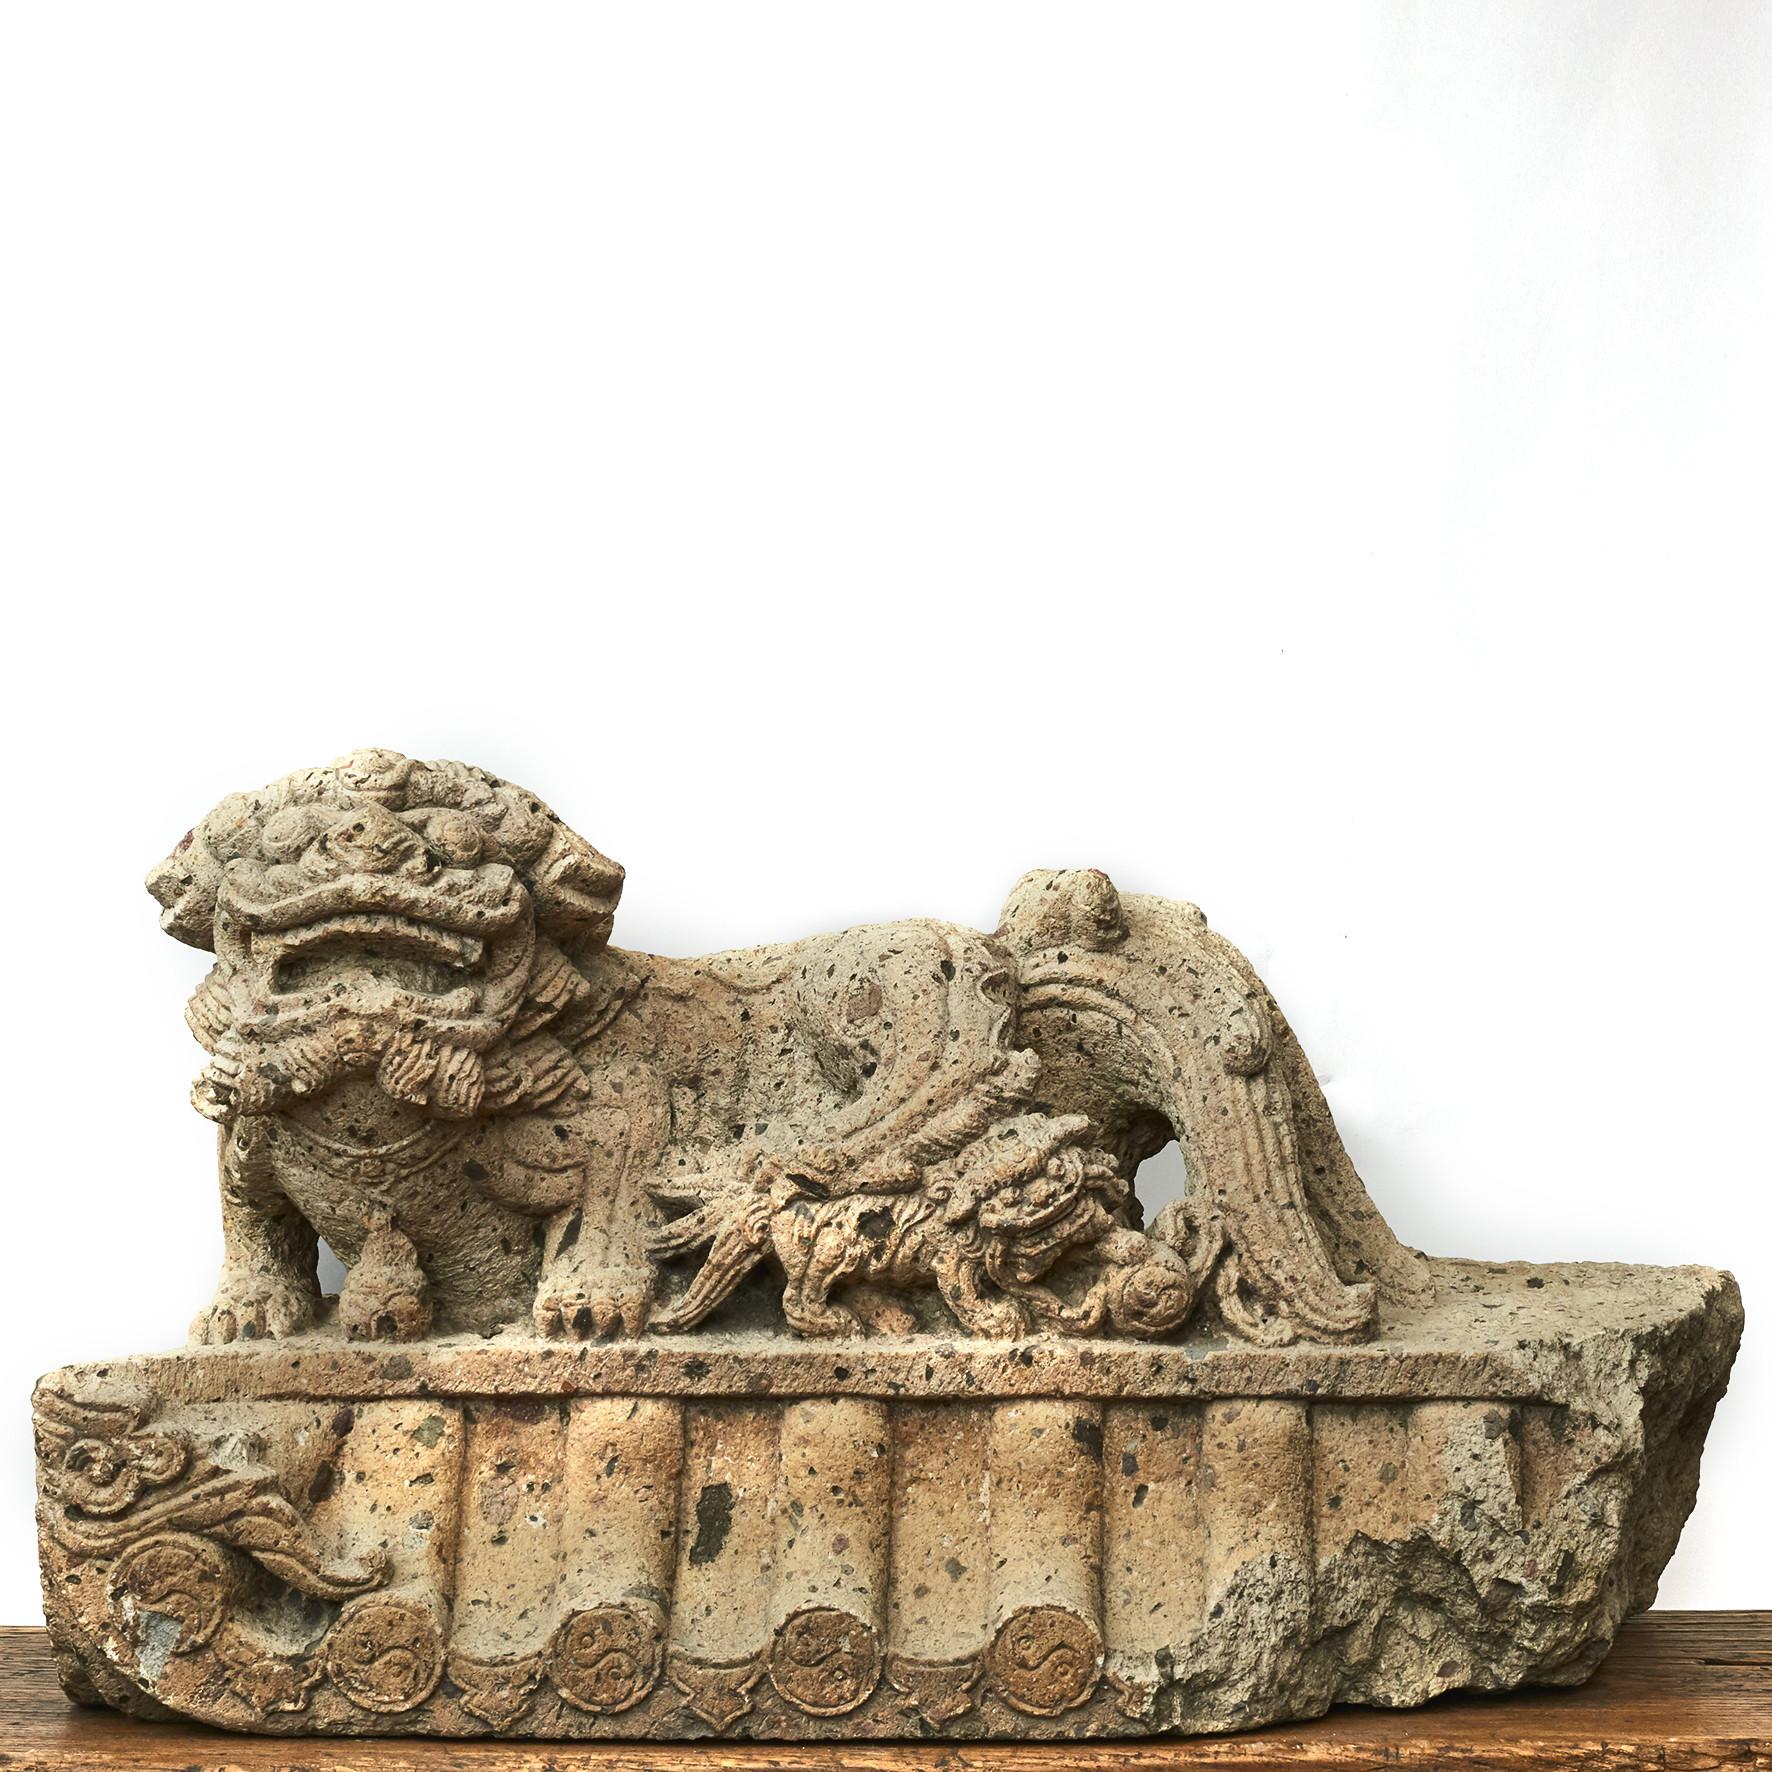 Pair of Chinese carved stone foo dog guardian lions from the 16-17th century. Very detailed.
The pair consist of a male leaning his paw upon an embroidered ball (in imperial contexts, representing supremacy over the world) and a female restraining